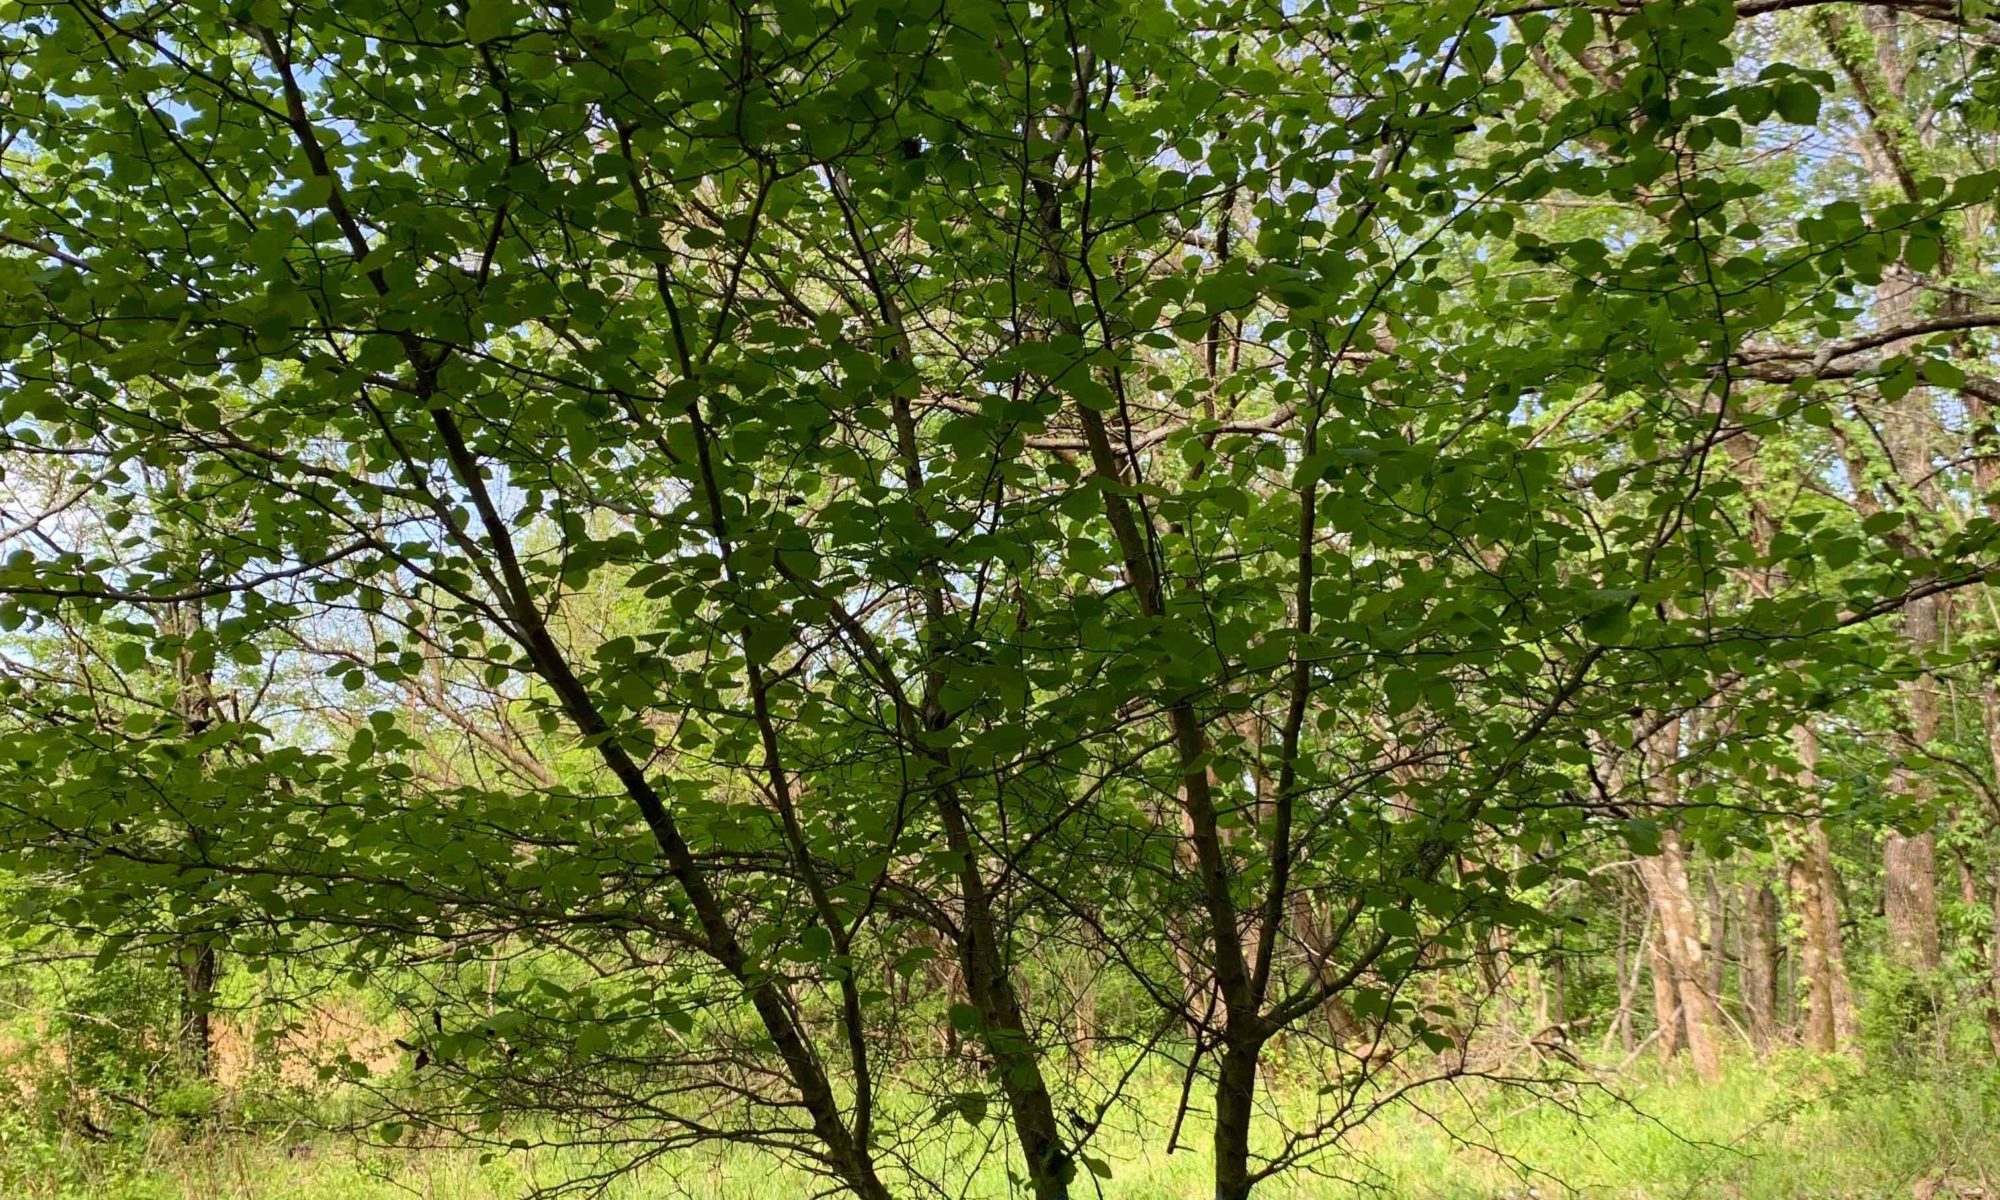 Harbison's hawthorn tree growing in wooded area.